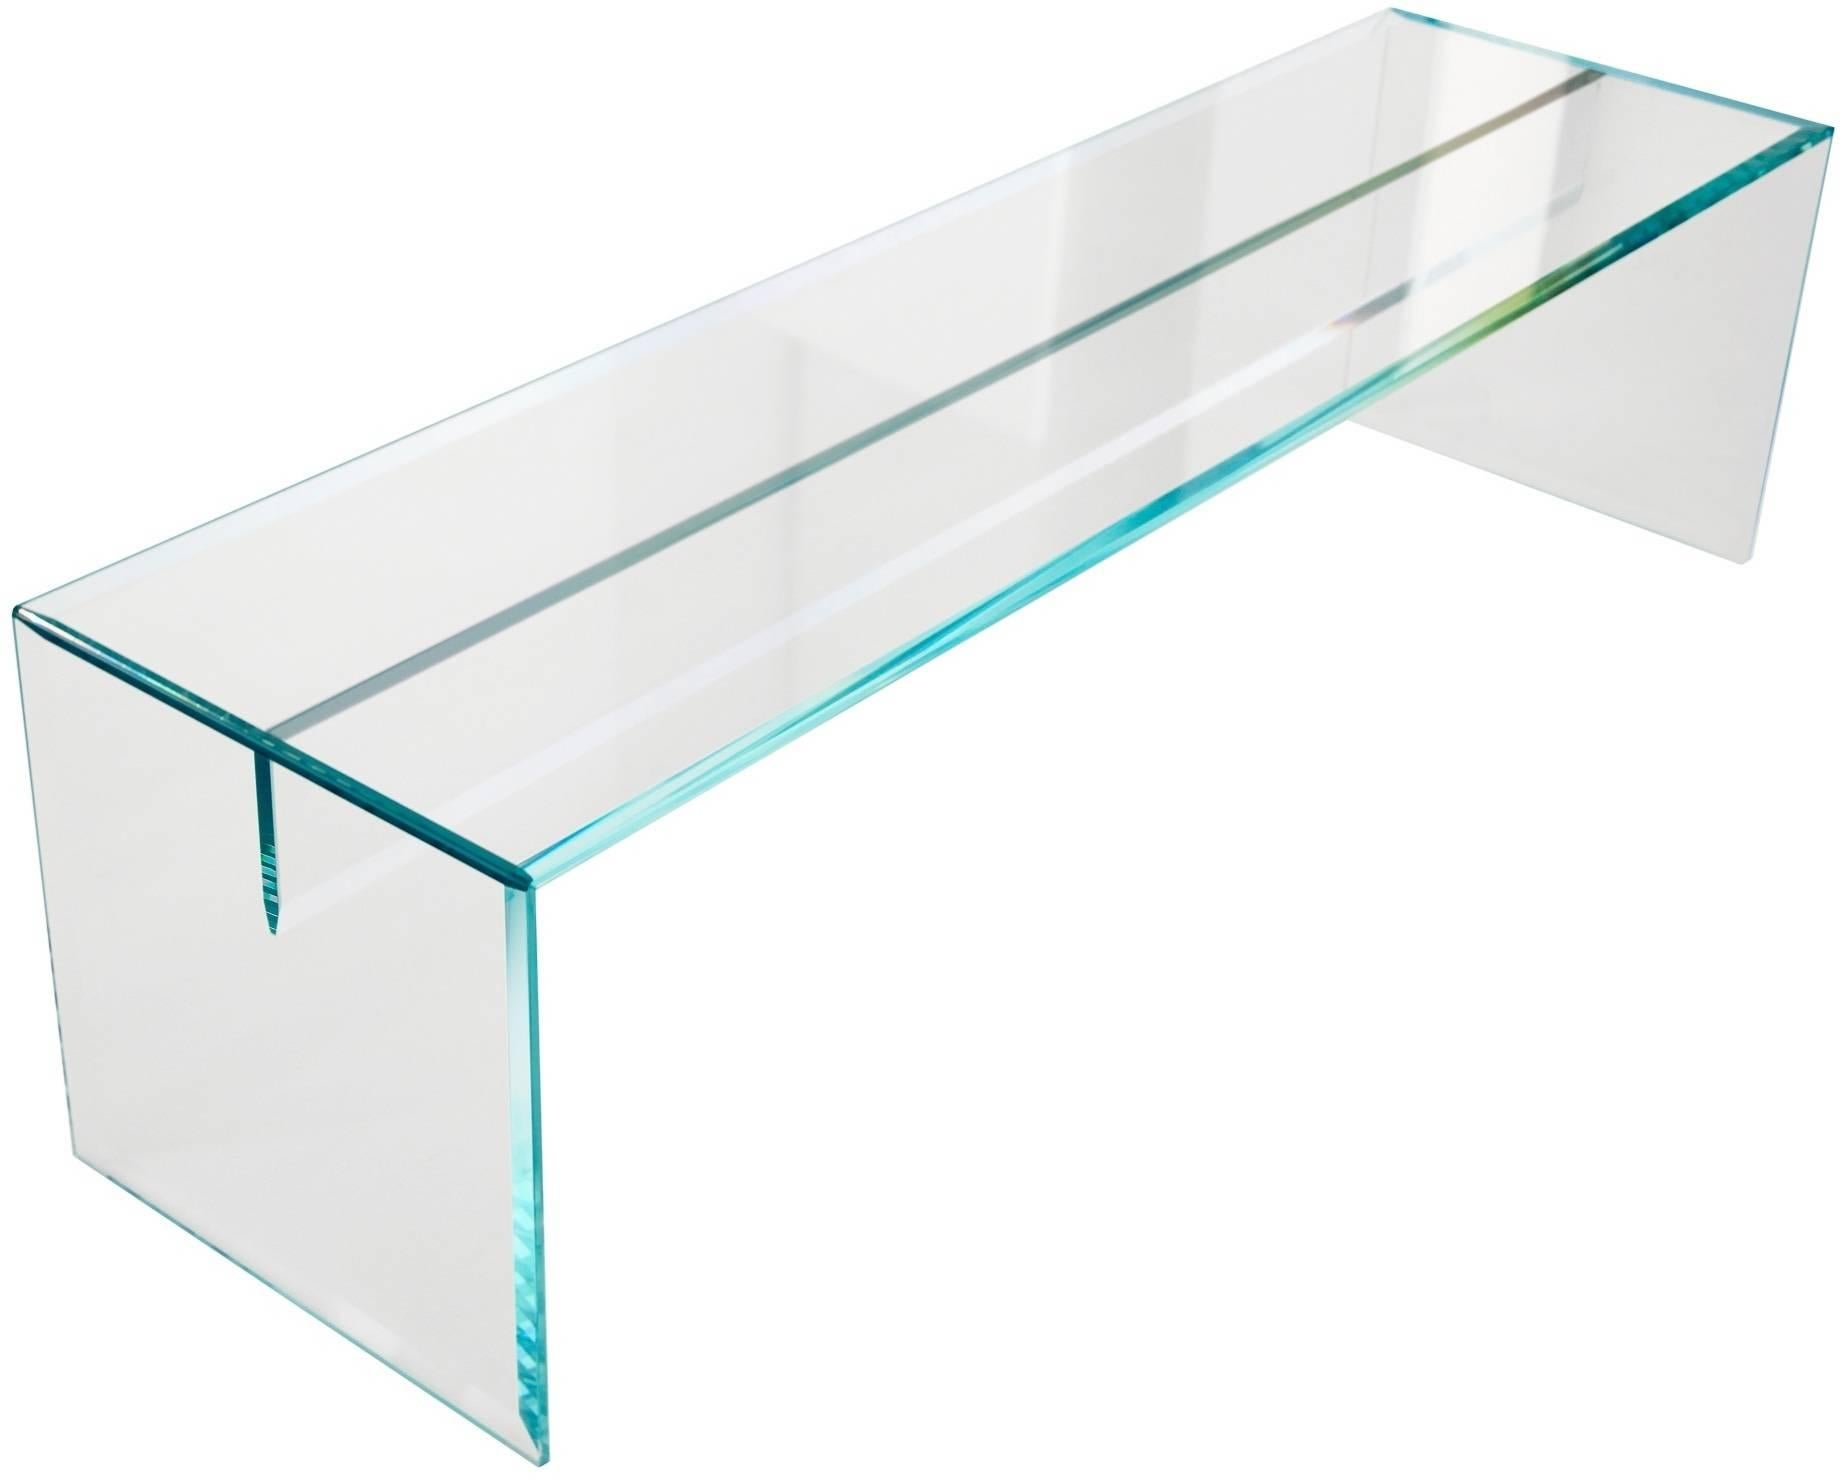 Bench in transparent extra light thick(15 mm), tempered and thermowelded glass. The glass is embellished with special bevelling which reflects and refracts the light, lending the object a rare preciousness. Despite its extreme lightness of form, the